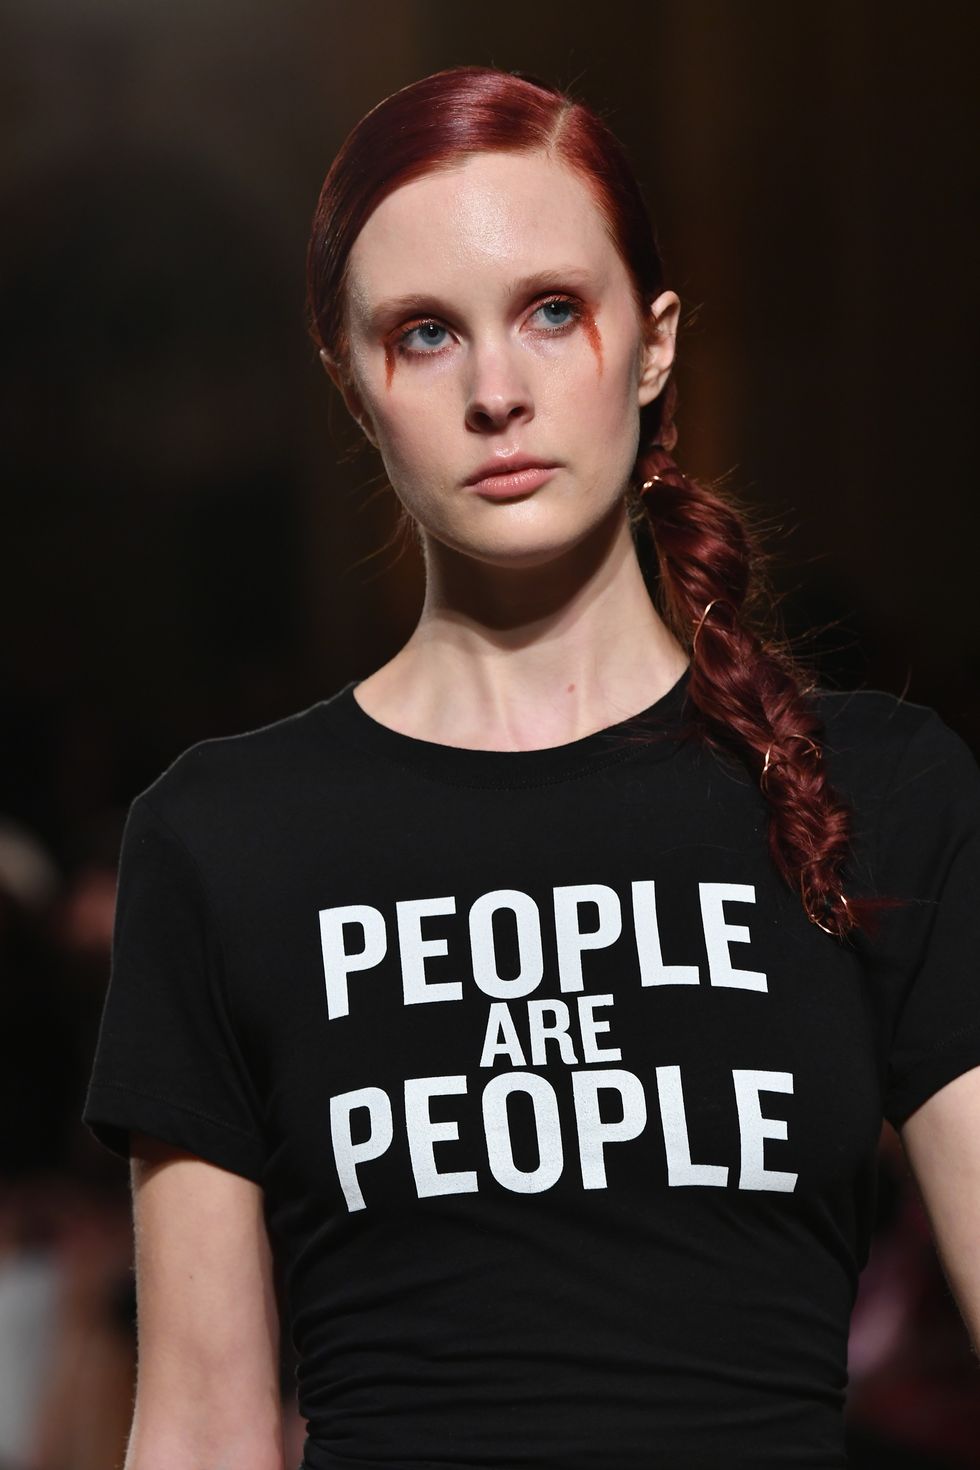 'People are people' at Christian Siriano, NYFW | ELLE UK